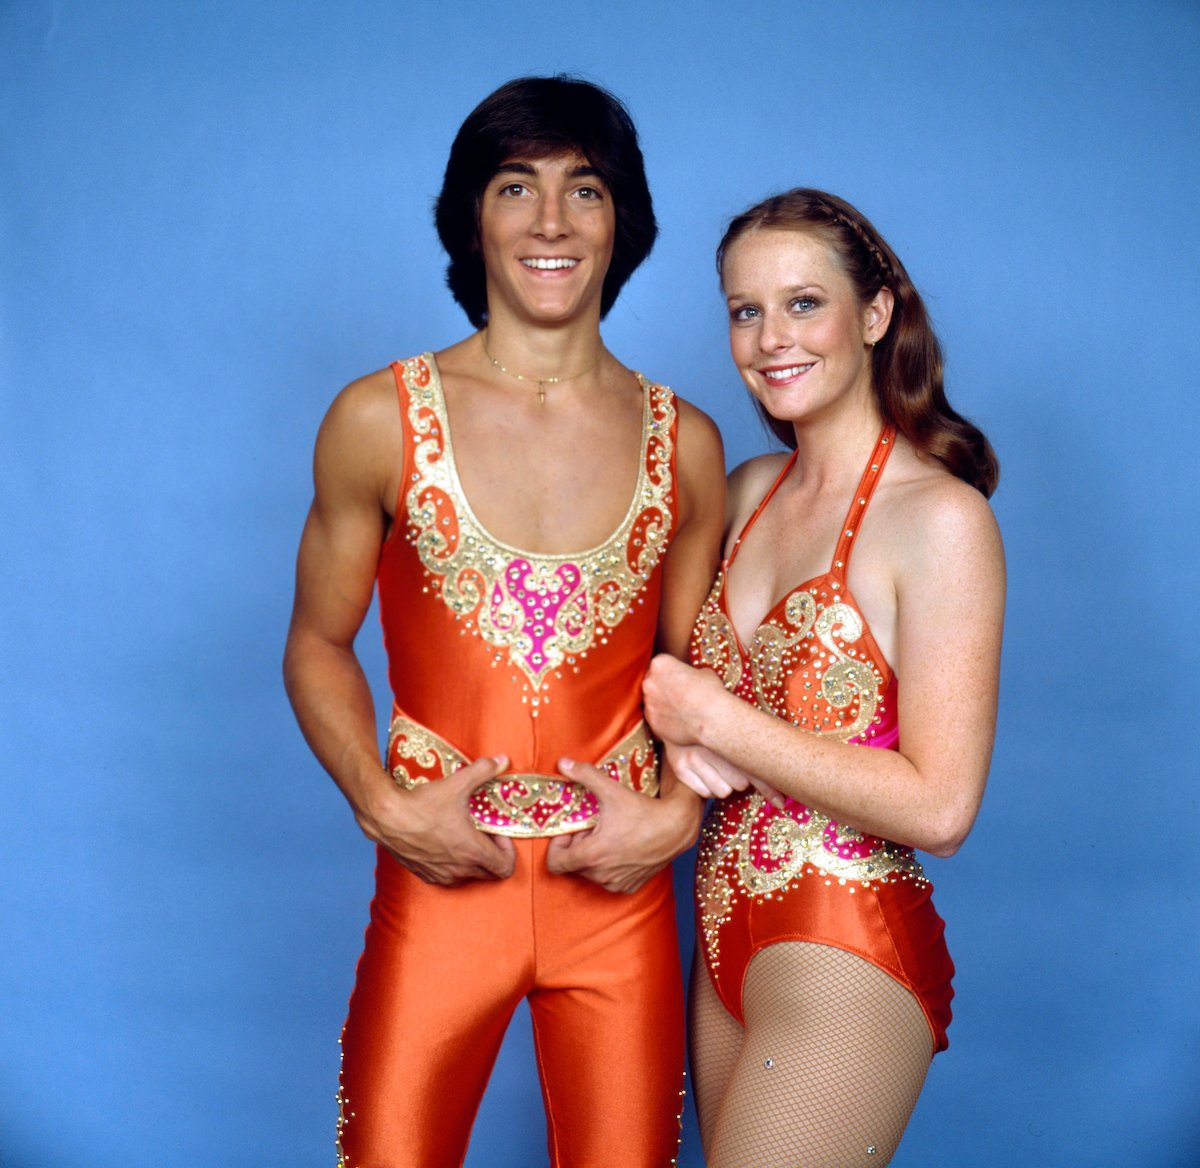 'Happy Days' star Scott Baio and Mary McDonough of 'The Waltons' in costume for 'Circus of the Stars'